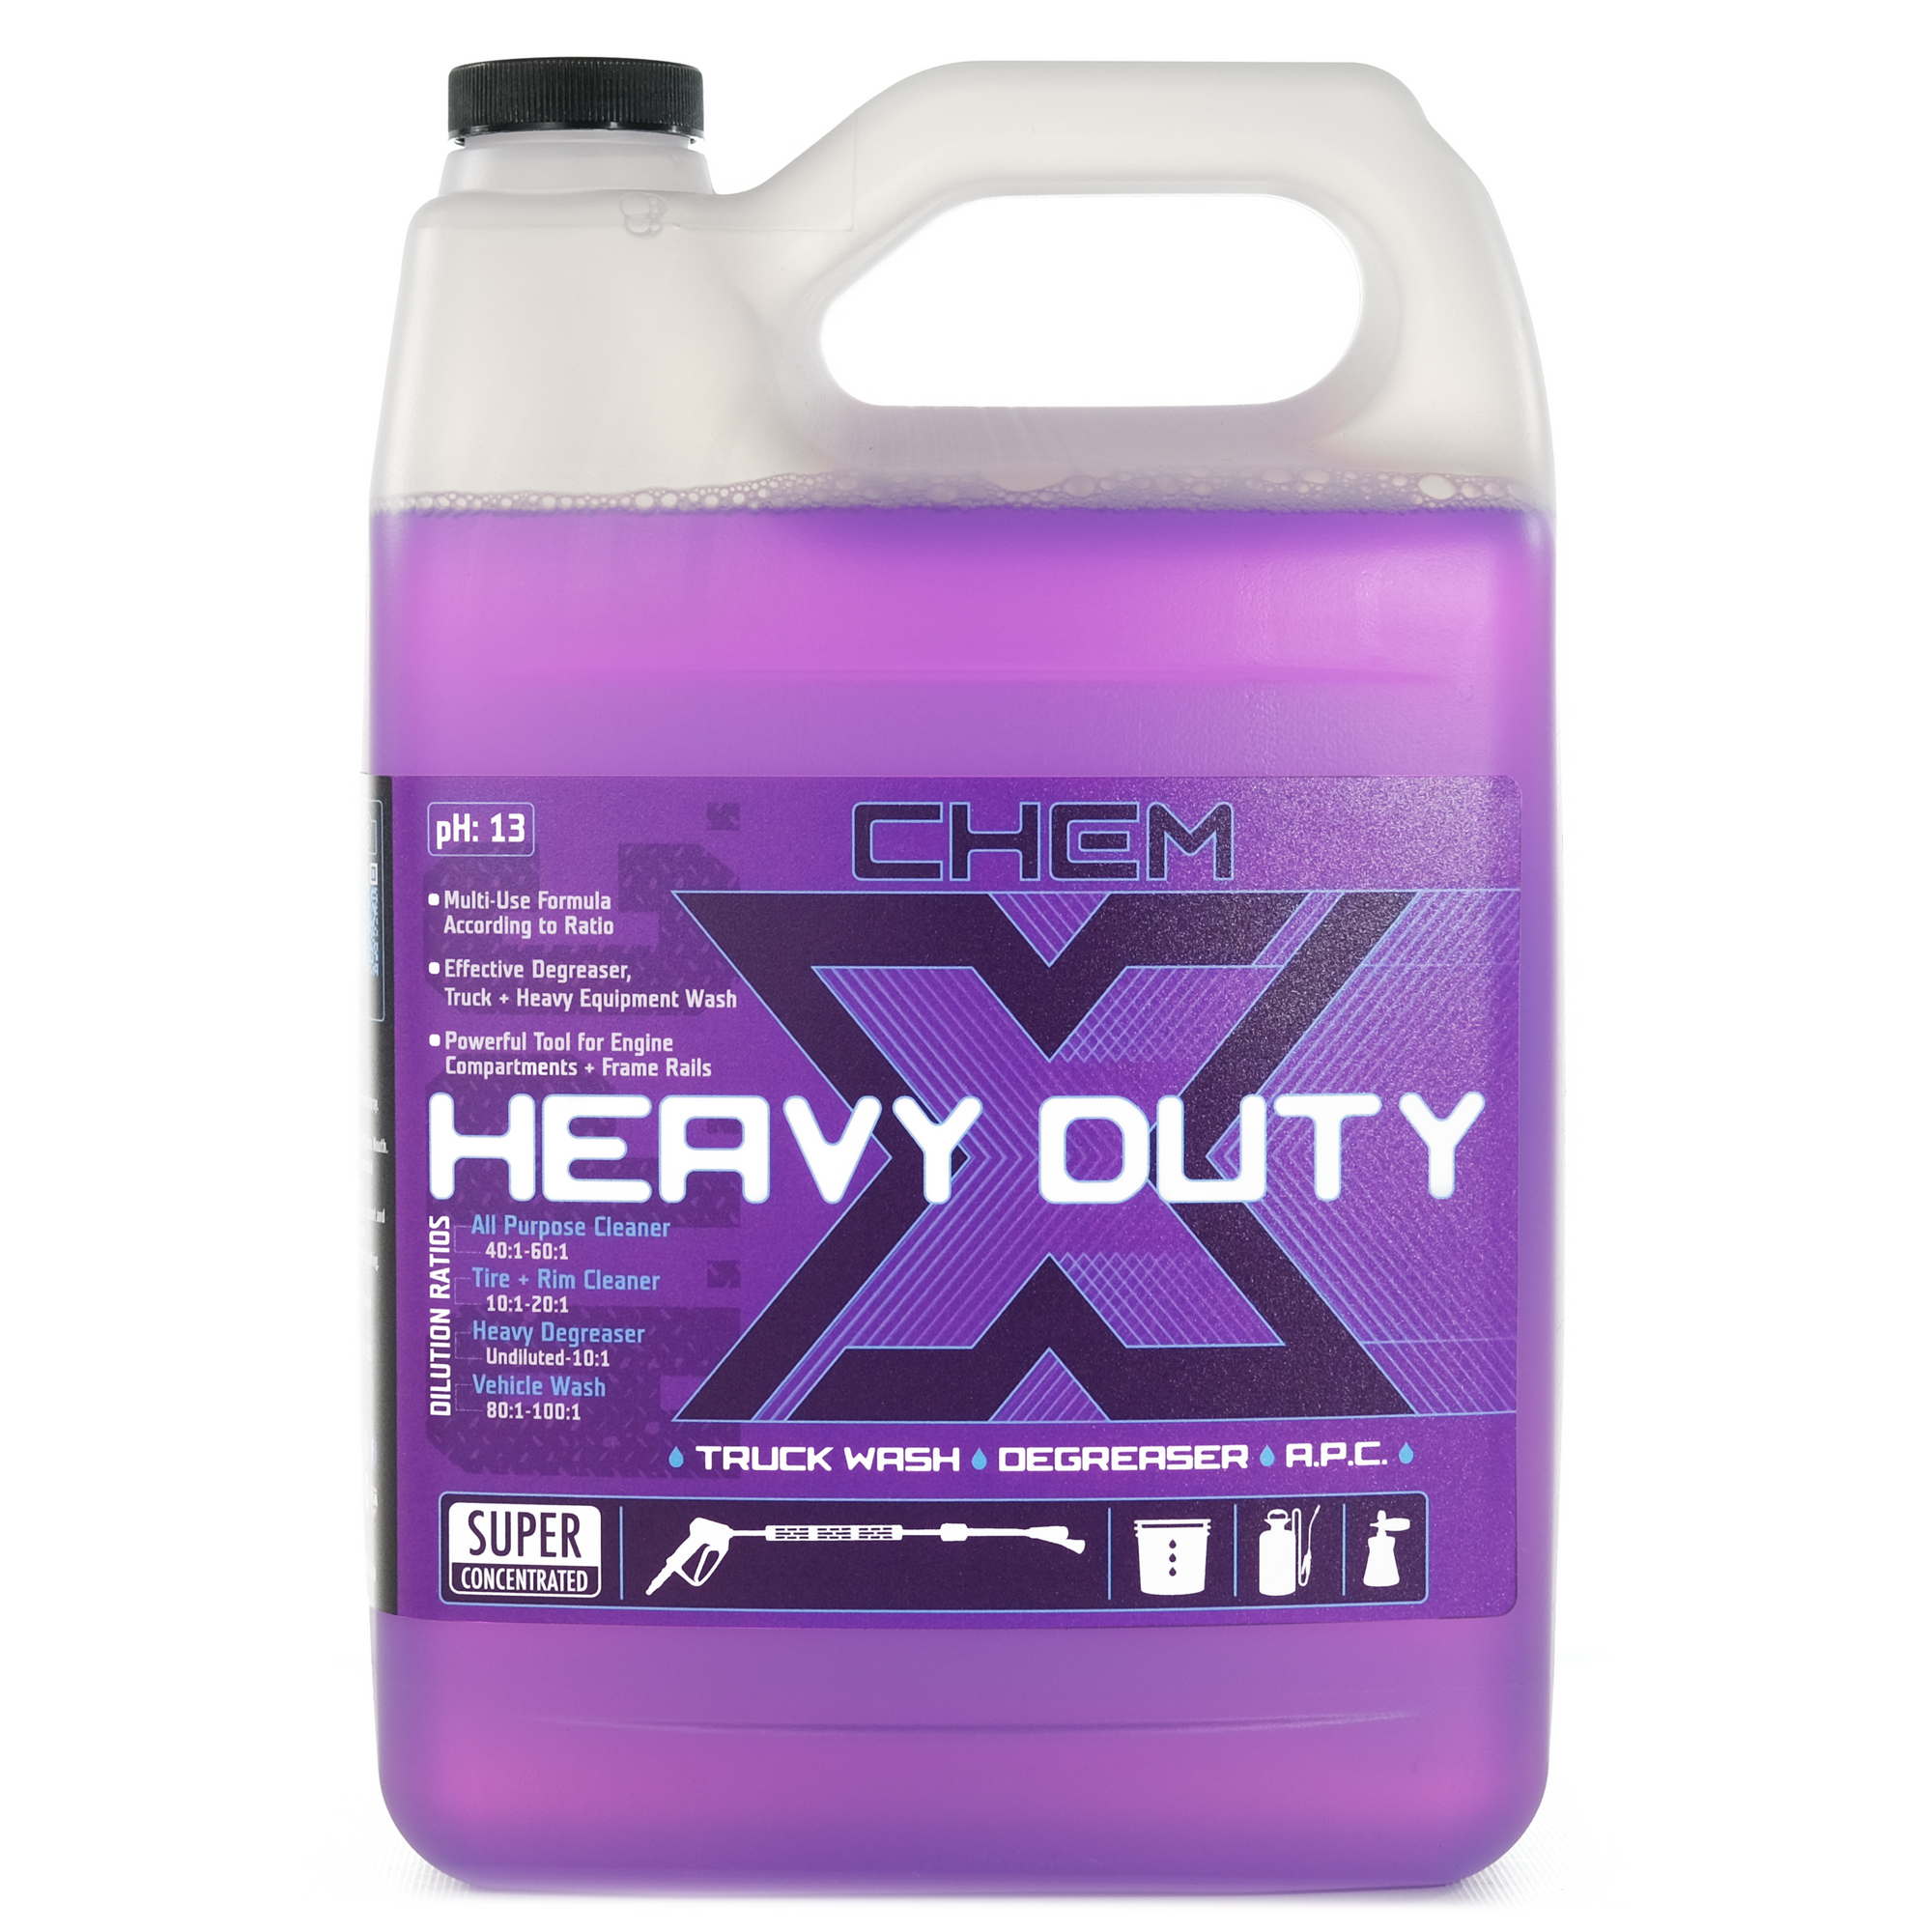 Heavy Duty: Super Concentrated Truck Wash + Degreaser + APC